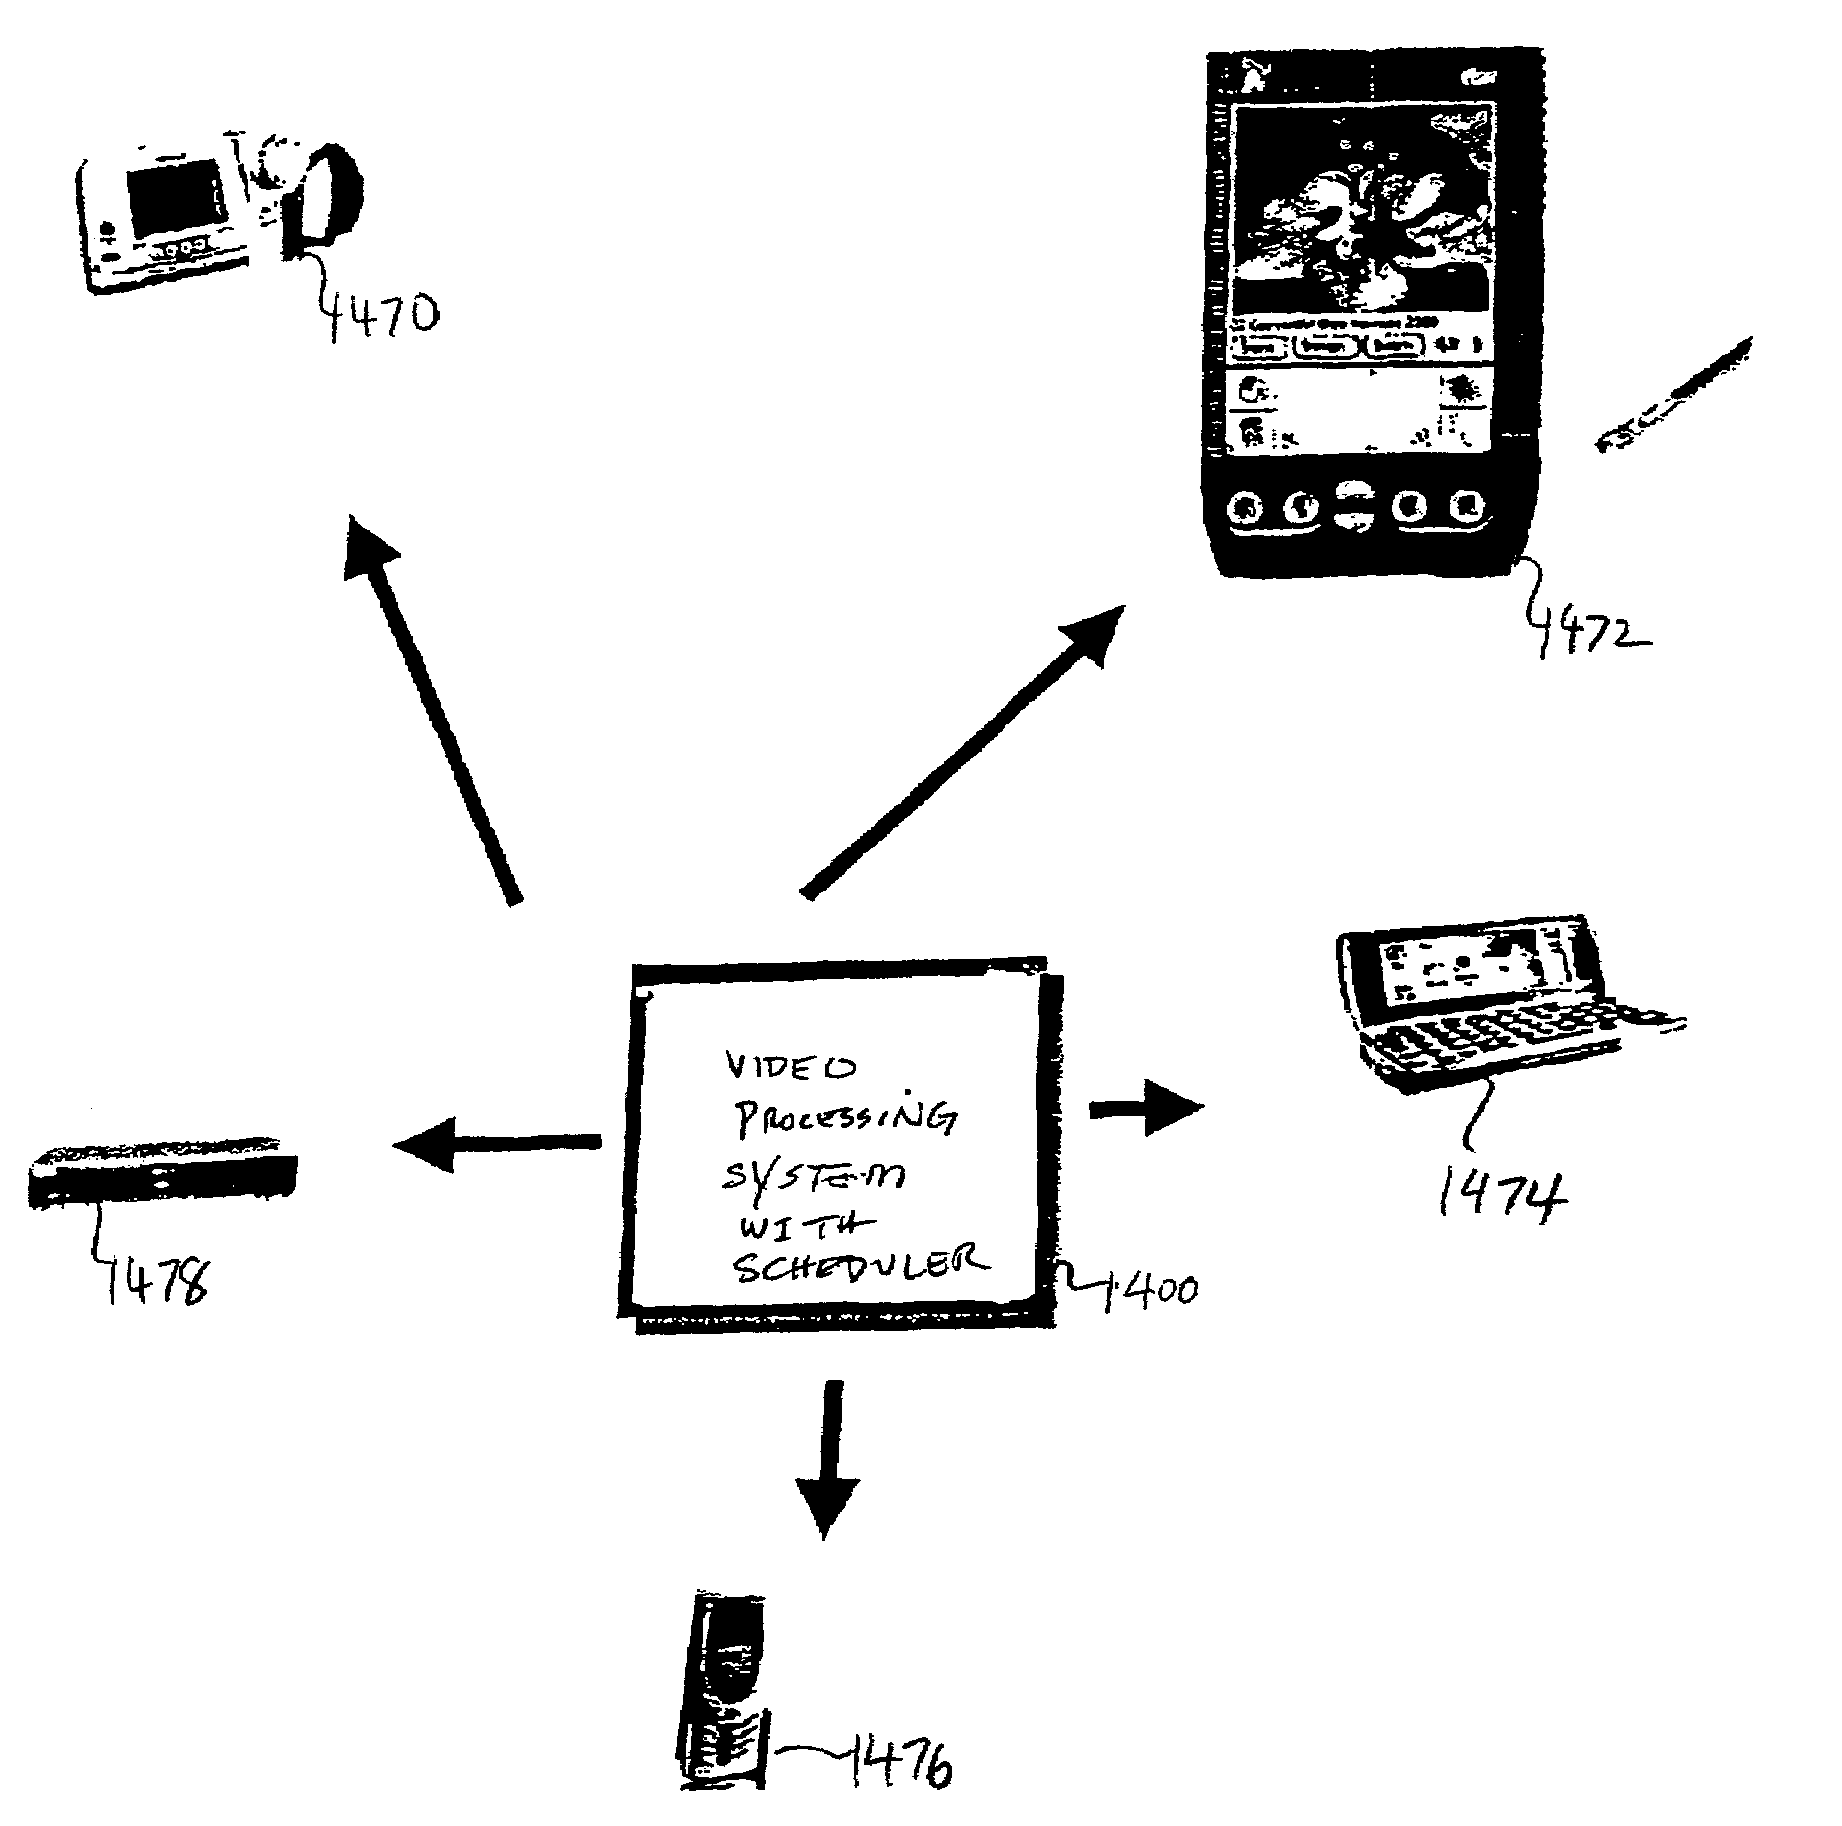 System for video processing control and scheduling wherein commands are unaffected by signal interrupts and schedule commands are transmitted at precise time